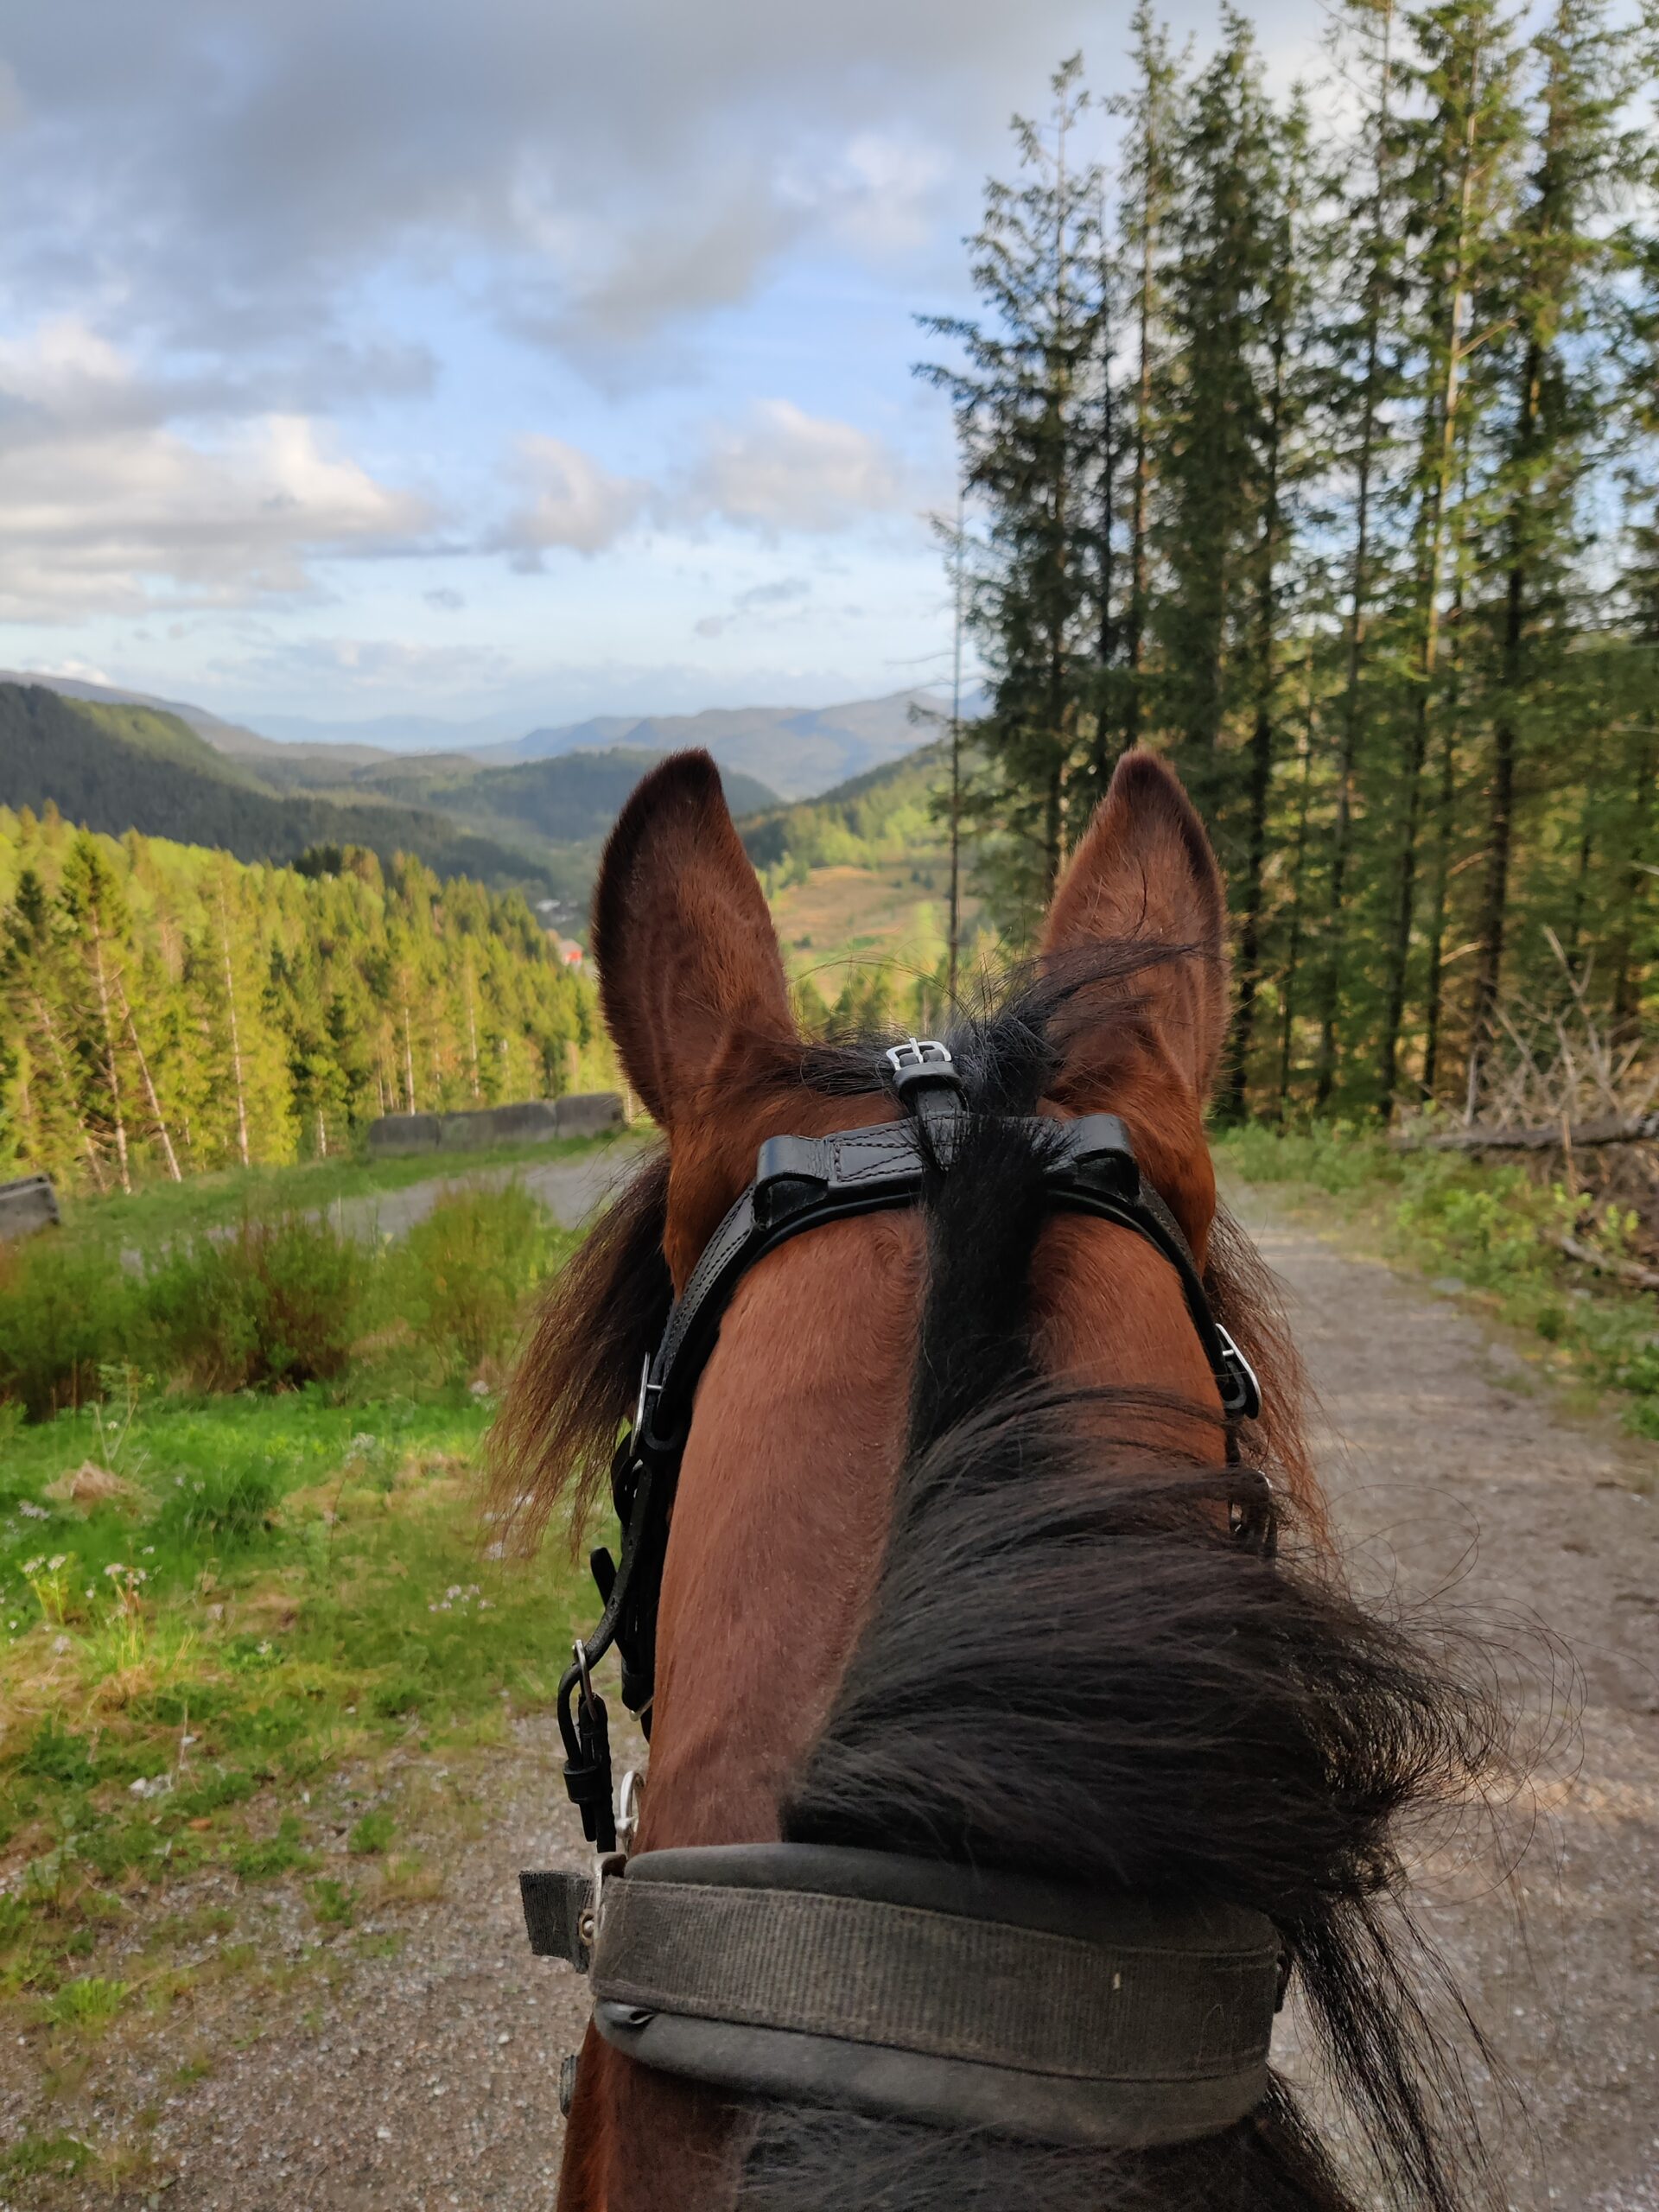 View between the ears of a horse towards the mountains beyond